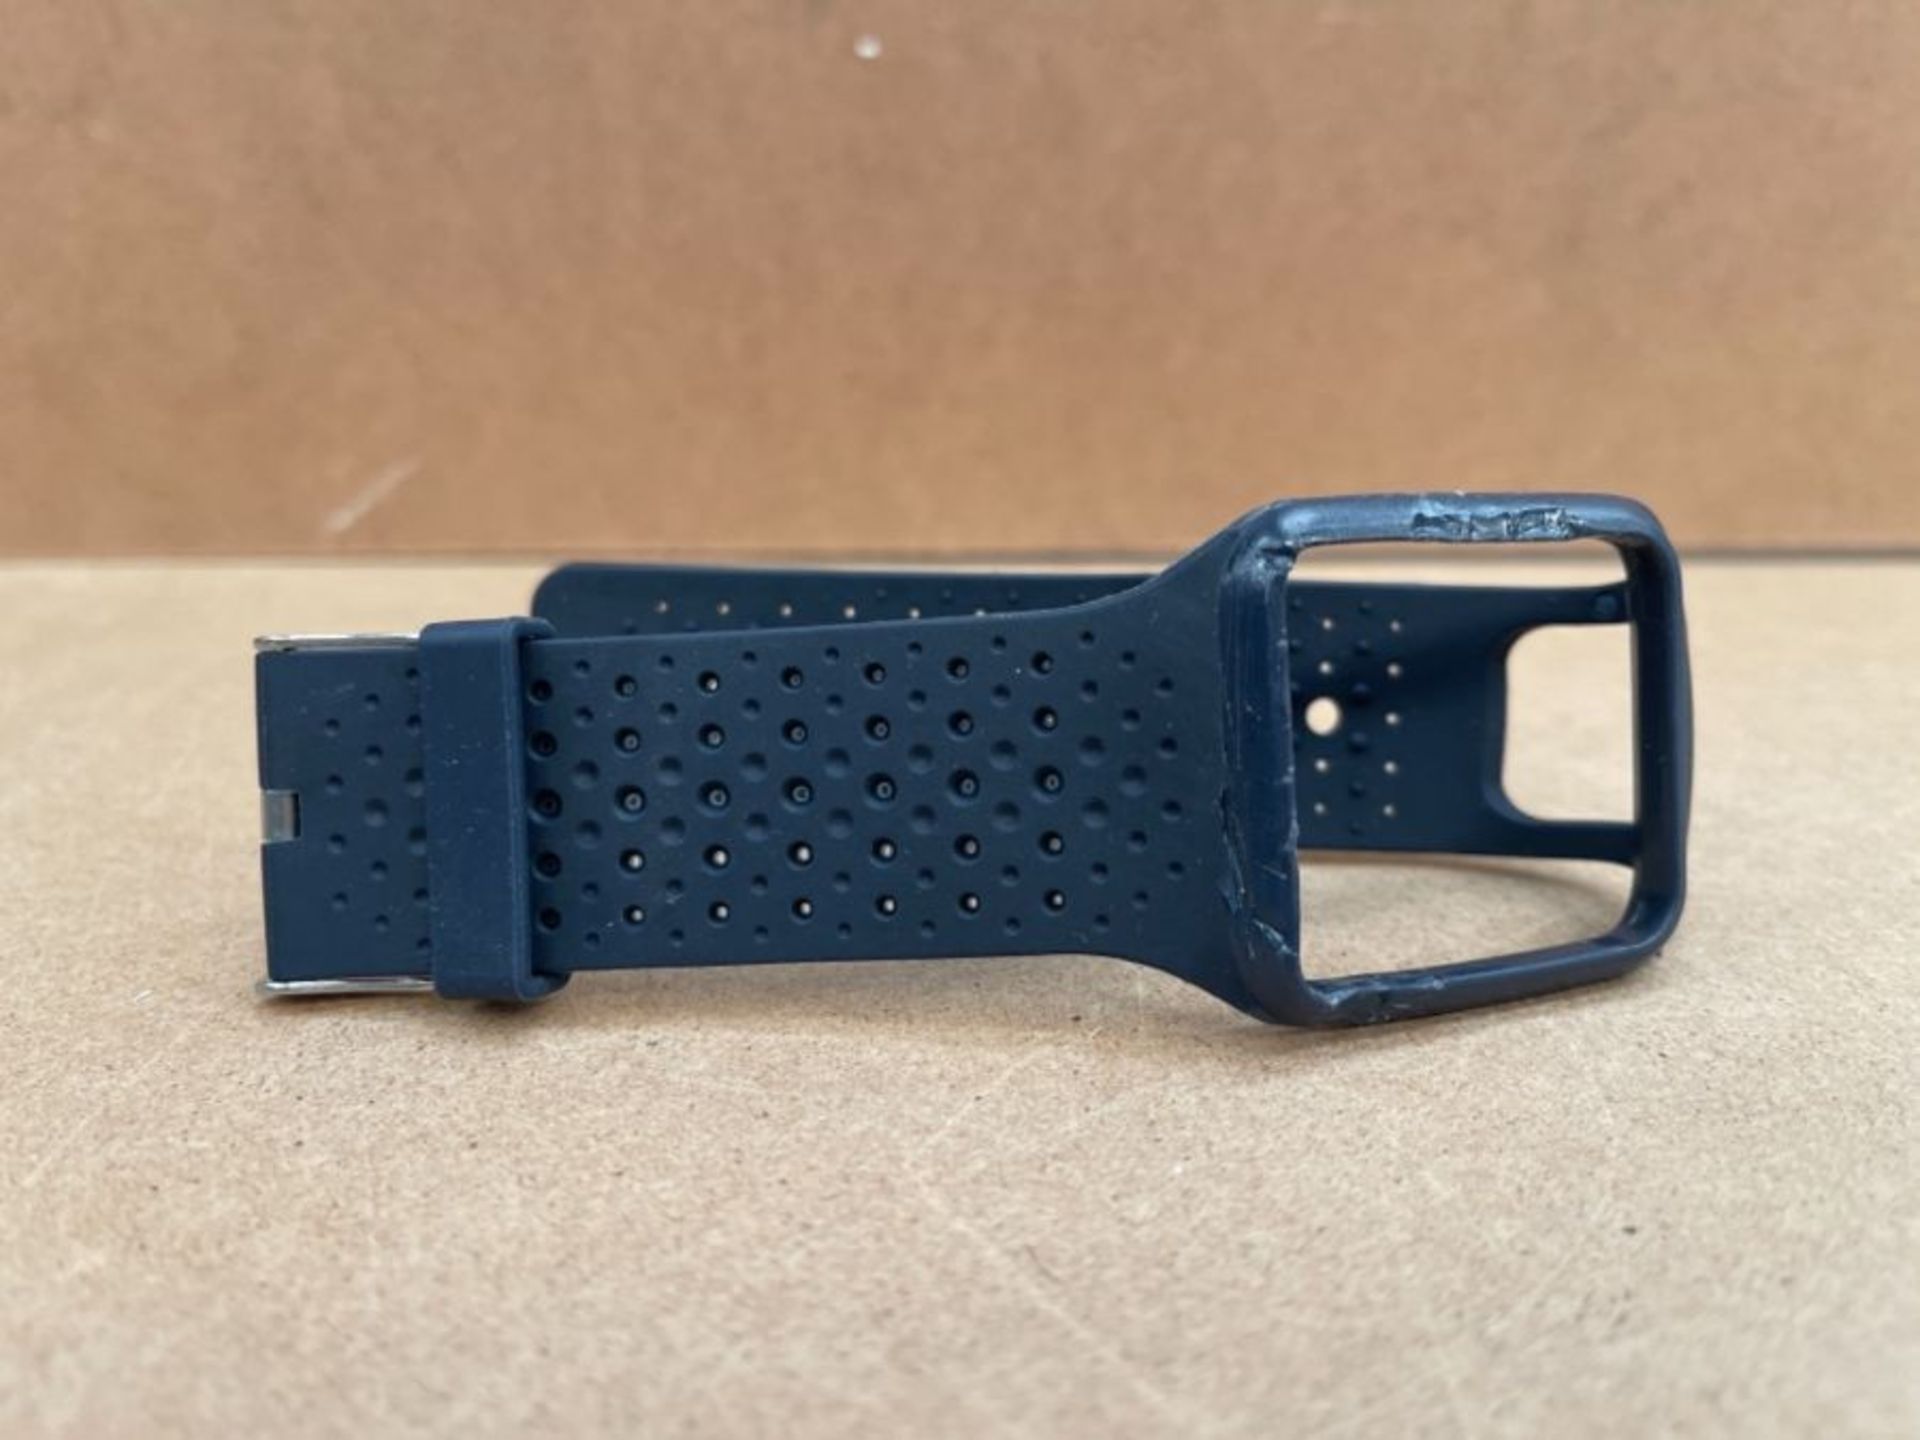 Silicone Watch Strap Replacement for TomTom Runner 1 / Multi-Sport/Golfer 1 - Fitness - Image 2 of 2